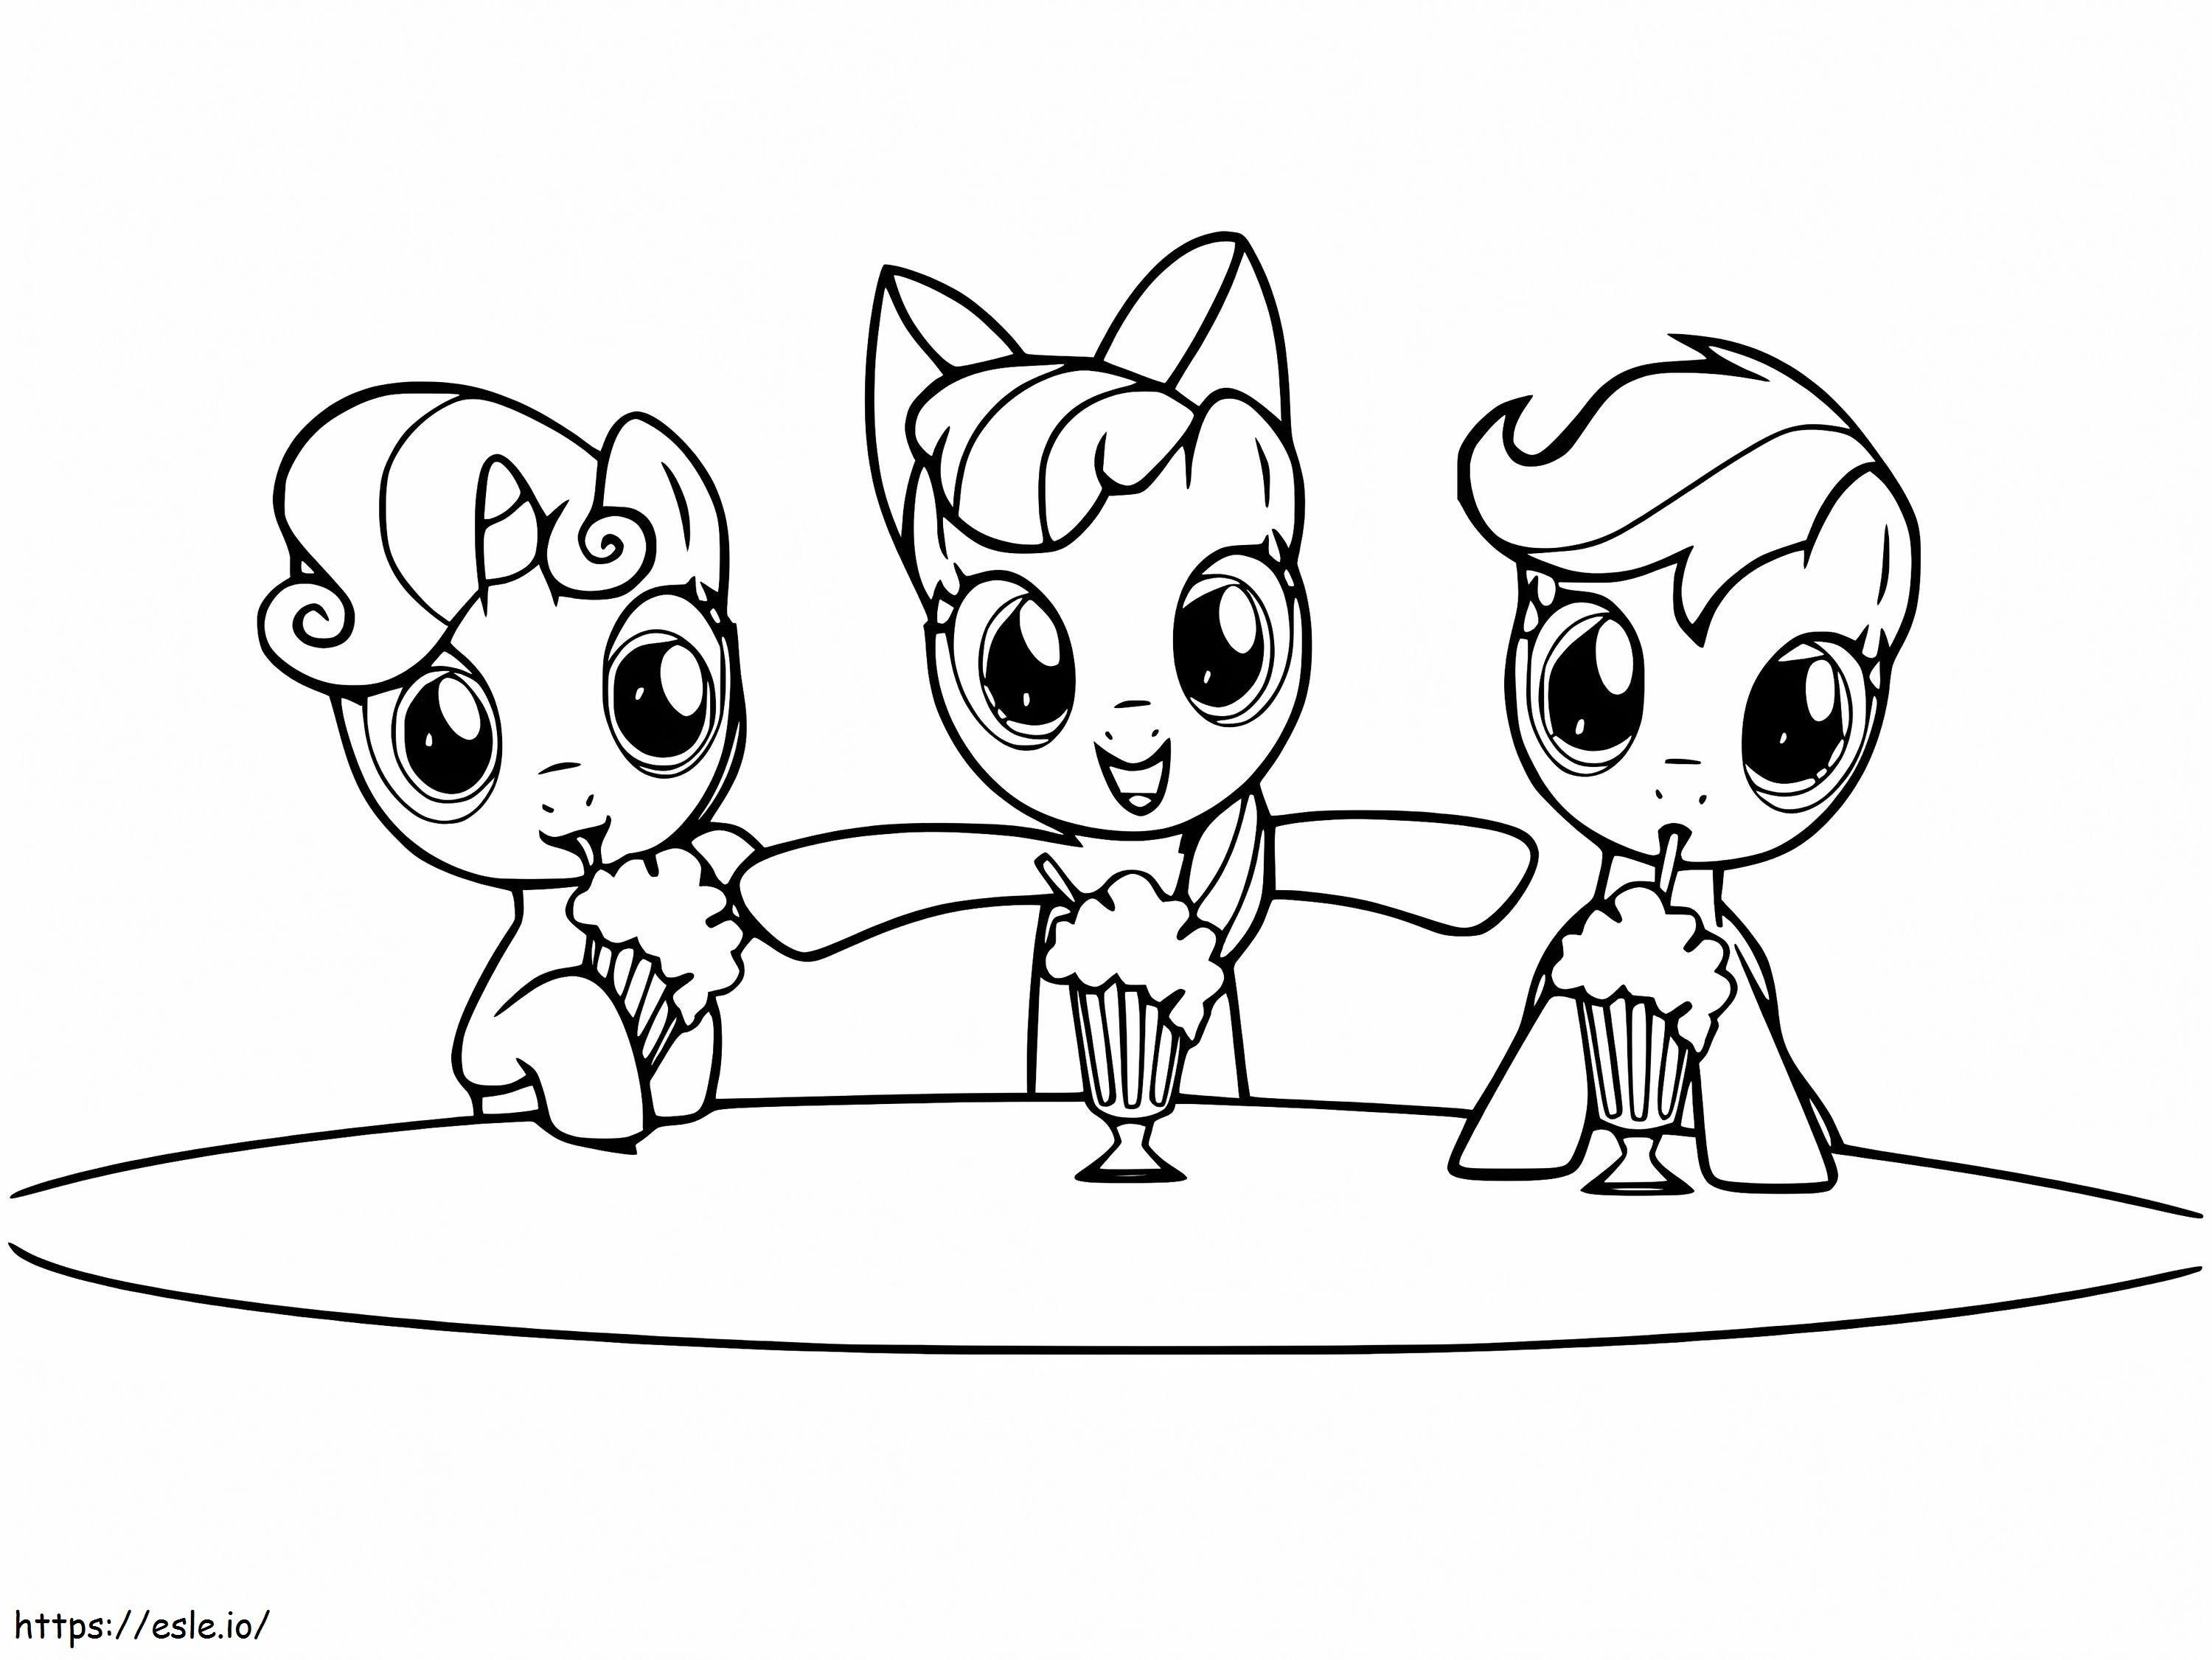 My Little Pony Printable coloring page